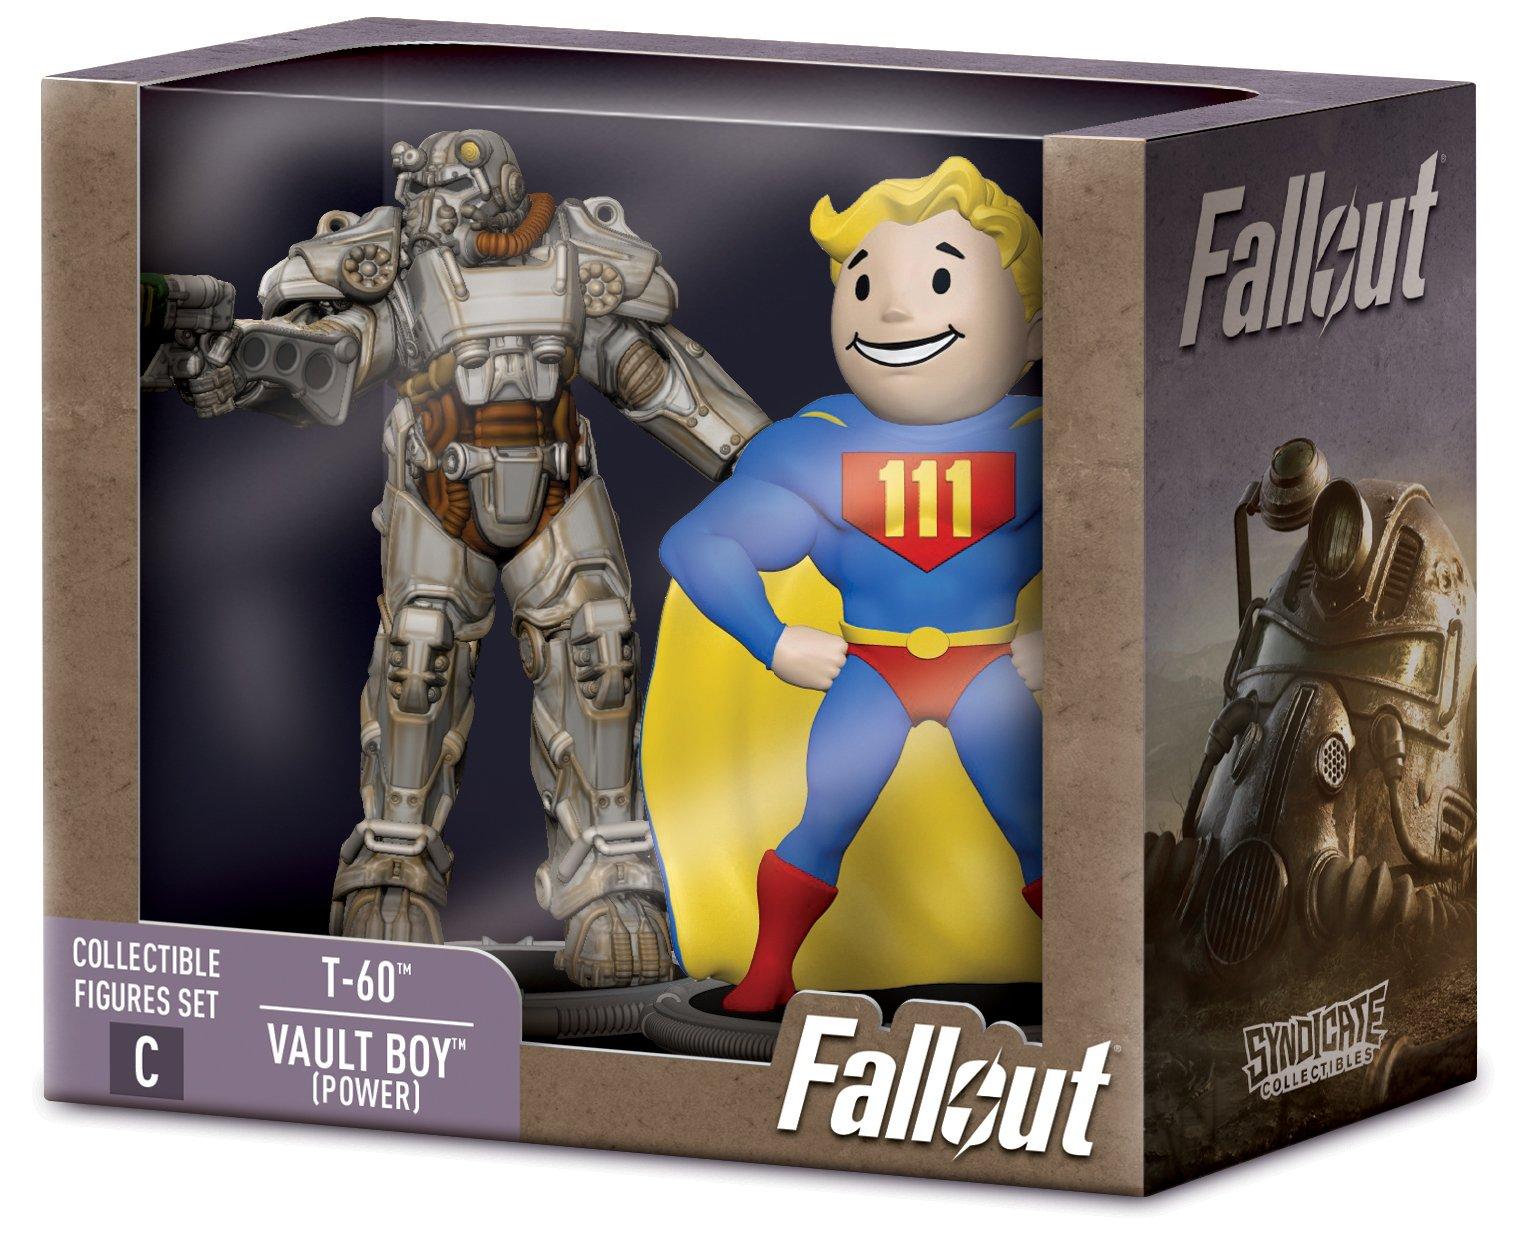 Fallout T-60 and Vault Boy (Power) (Build-A-Figure - Deathclaw) 3-in Action Figure Set